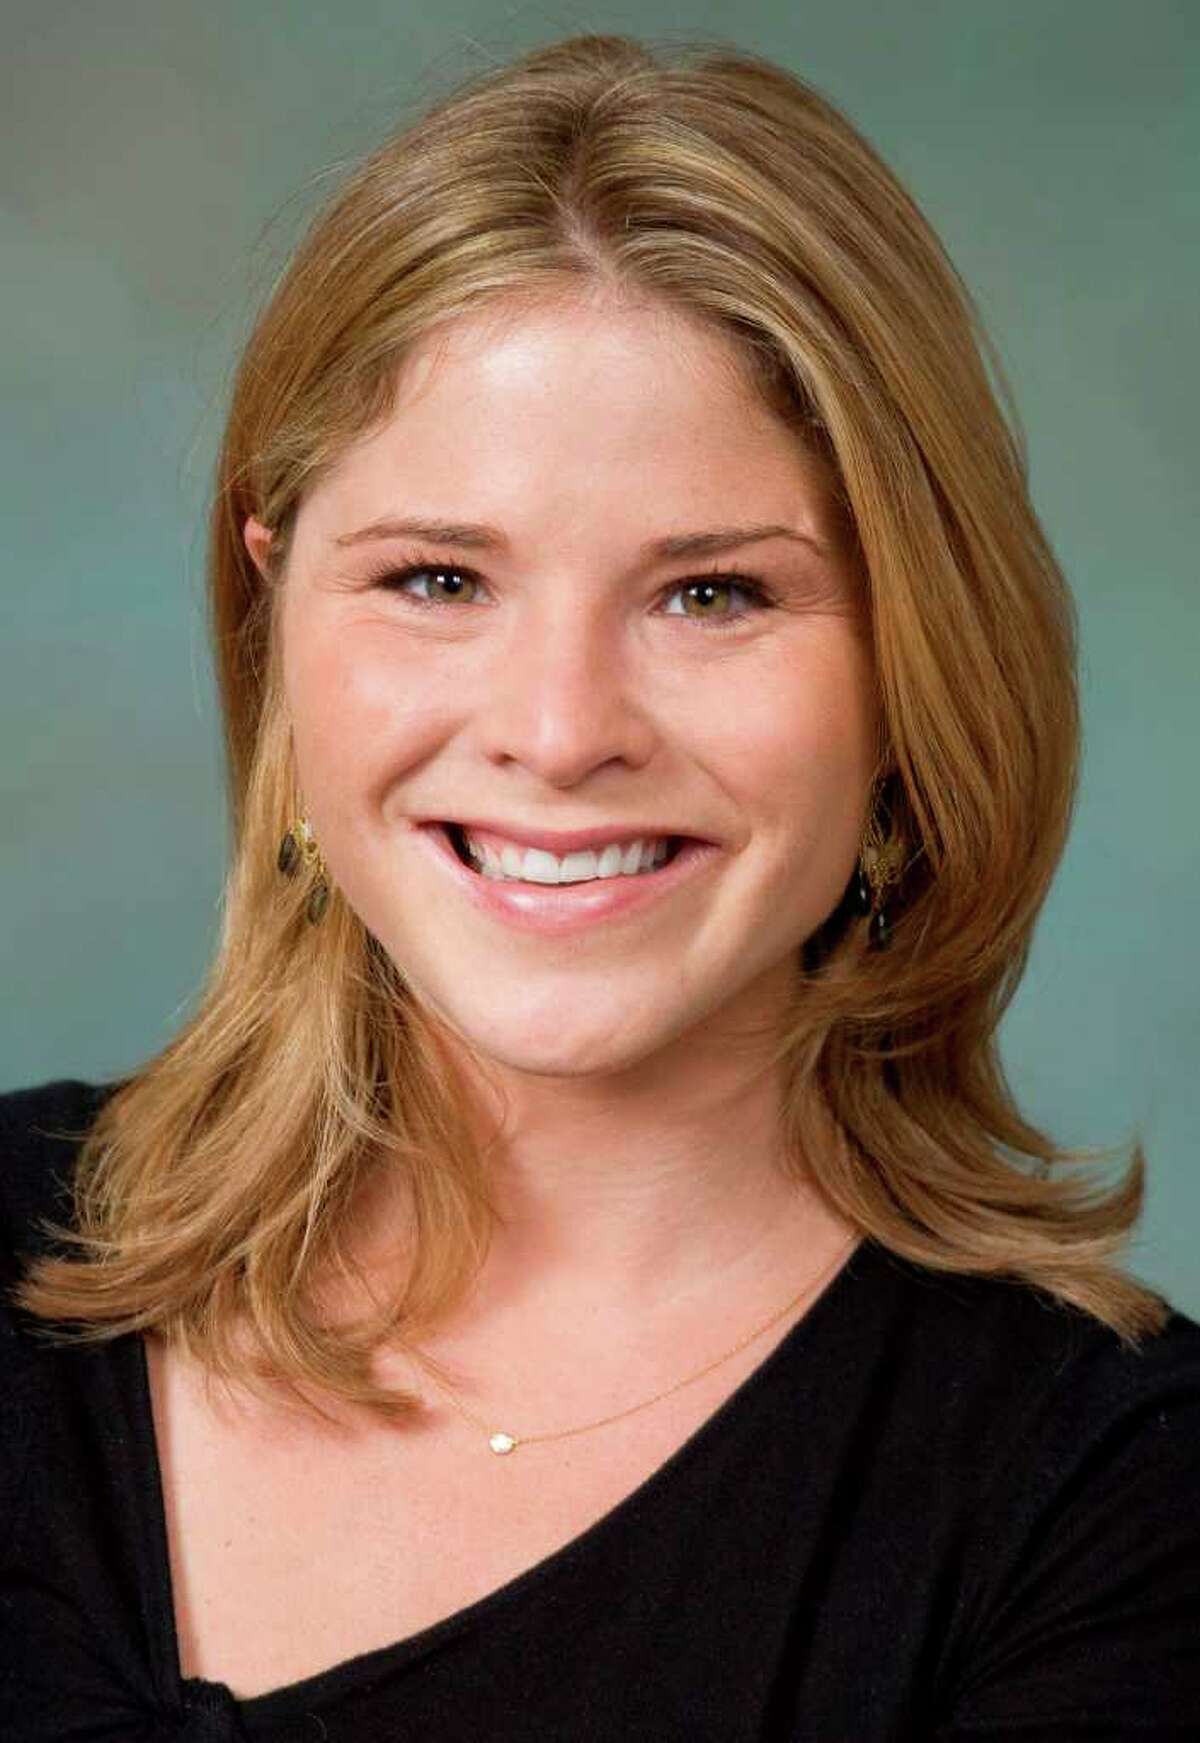 Jenna Bush Hager, daughter of former President George W. Bush and former First Lady Laura Bush, will be the keynote speaker at the Women of Vision Fairfield County 10-year anniversary celebration April 1 at Burning Tree Country Club. Hager, a correspondent to NBC’s “Today” and the author of “Ana’s Story: A Journey of Hope,” will present the keynote address, “Making a Difference: How the Power of Compassion Changes Lives."